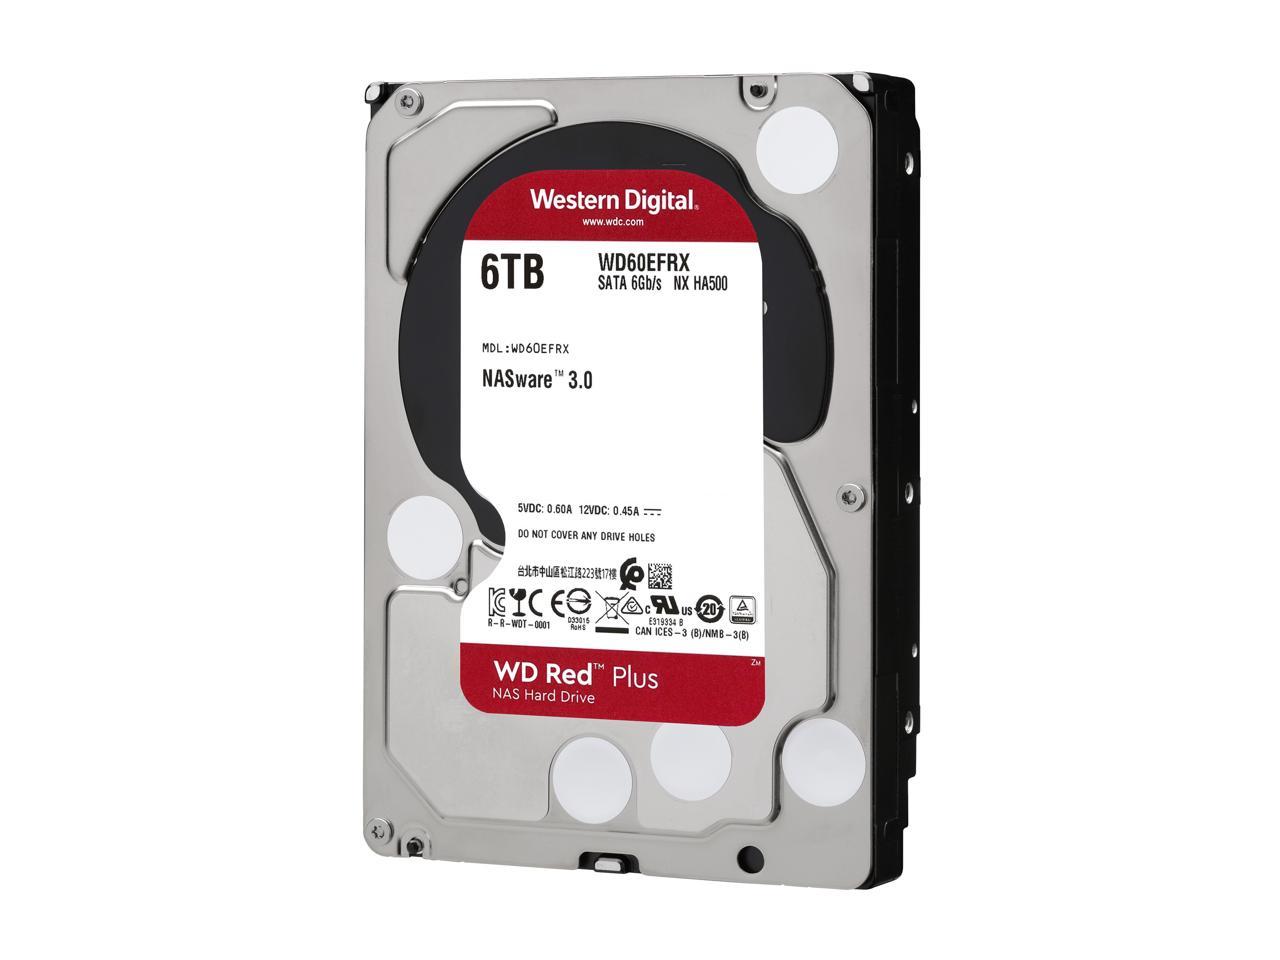 WD60EFRX Wd Red Plus 6Tb Nas Hard Disk Drive - 5400 Rpm Class Sata